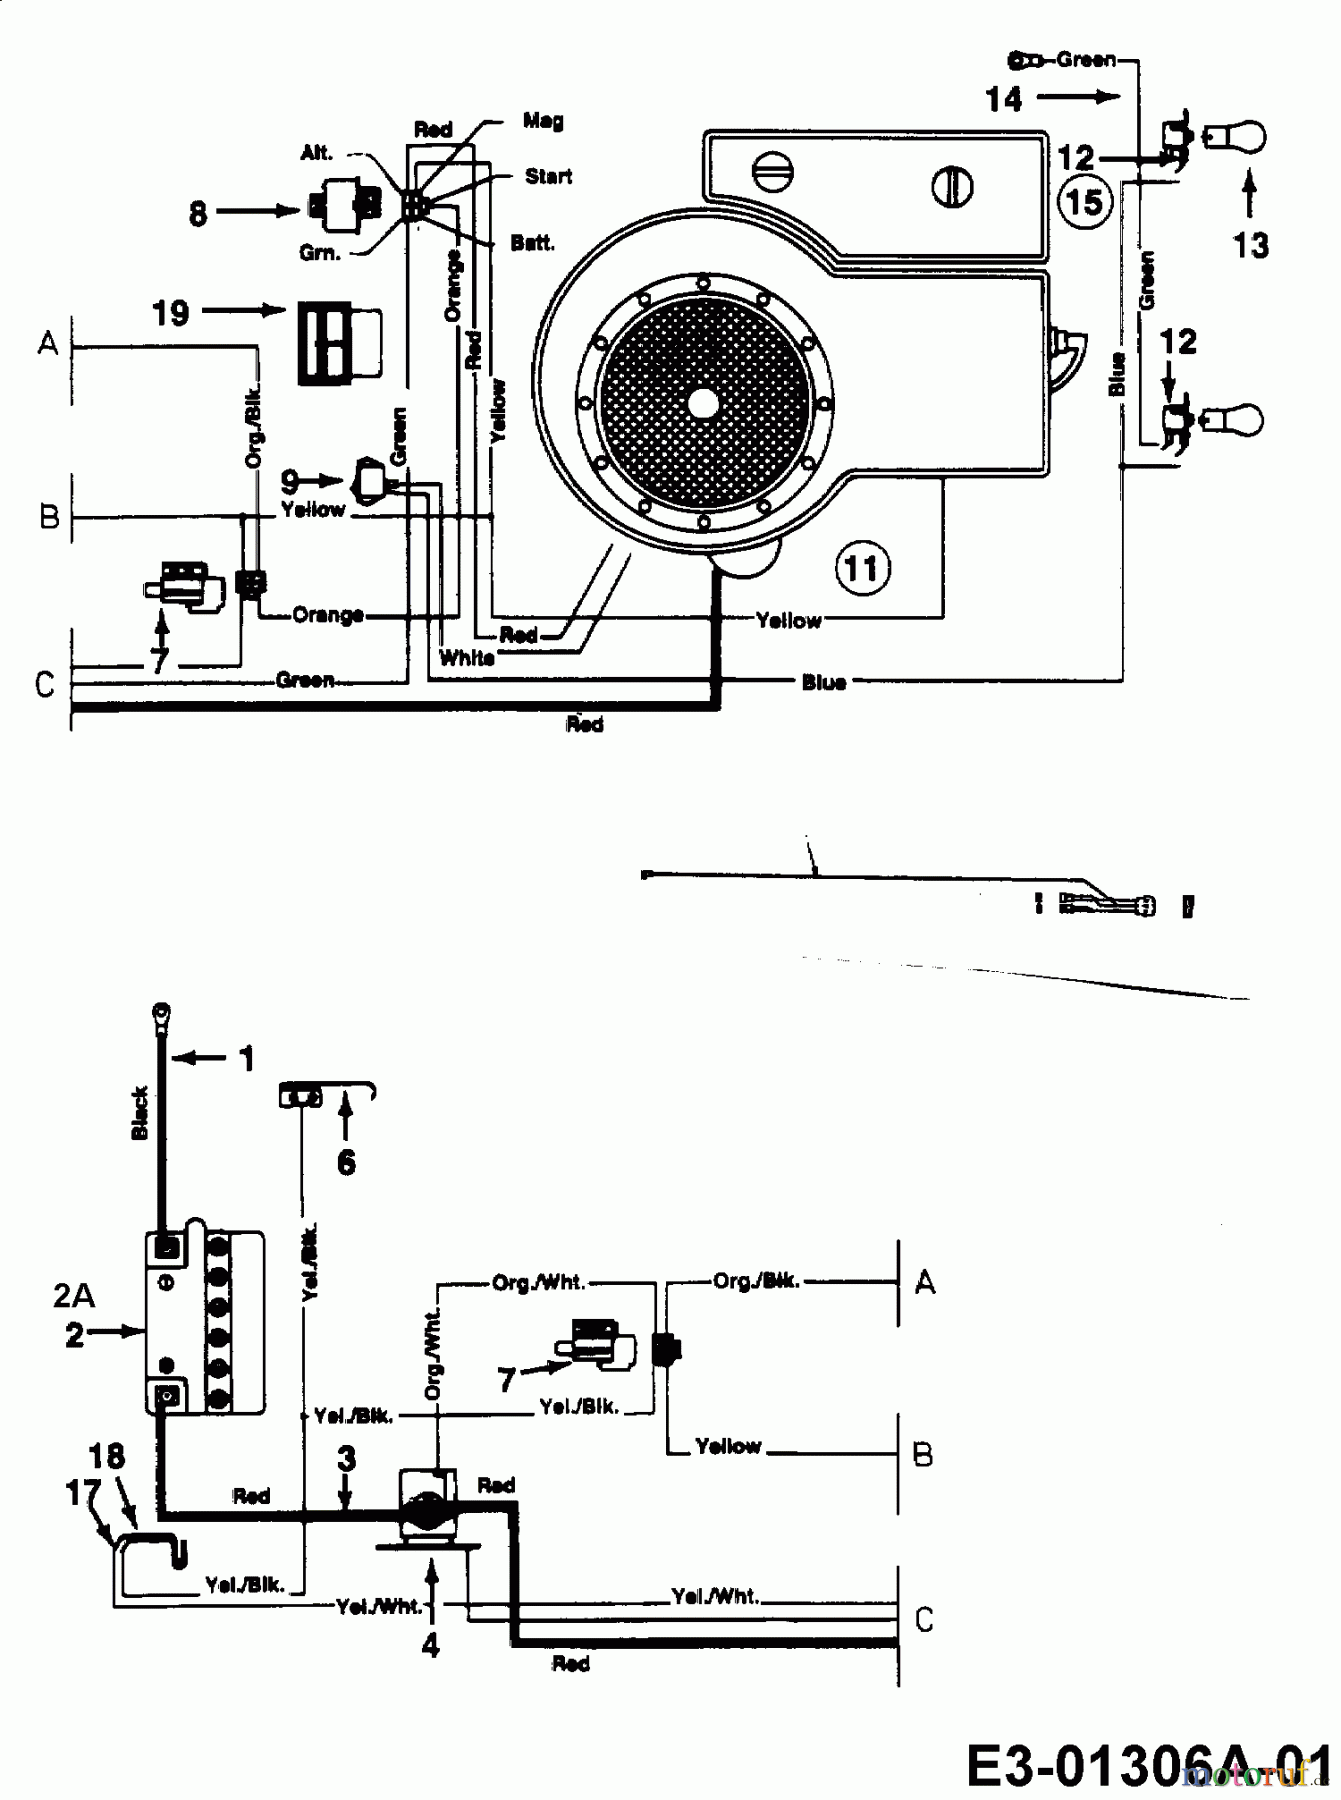  Edenparc Lawn tractors EP 1396 13AA479F608  (2003) Wiring diagram single cylinder